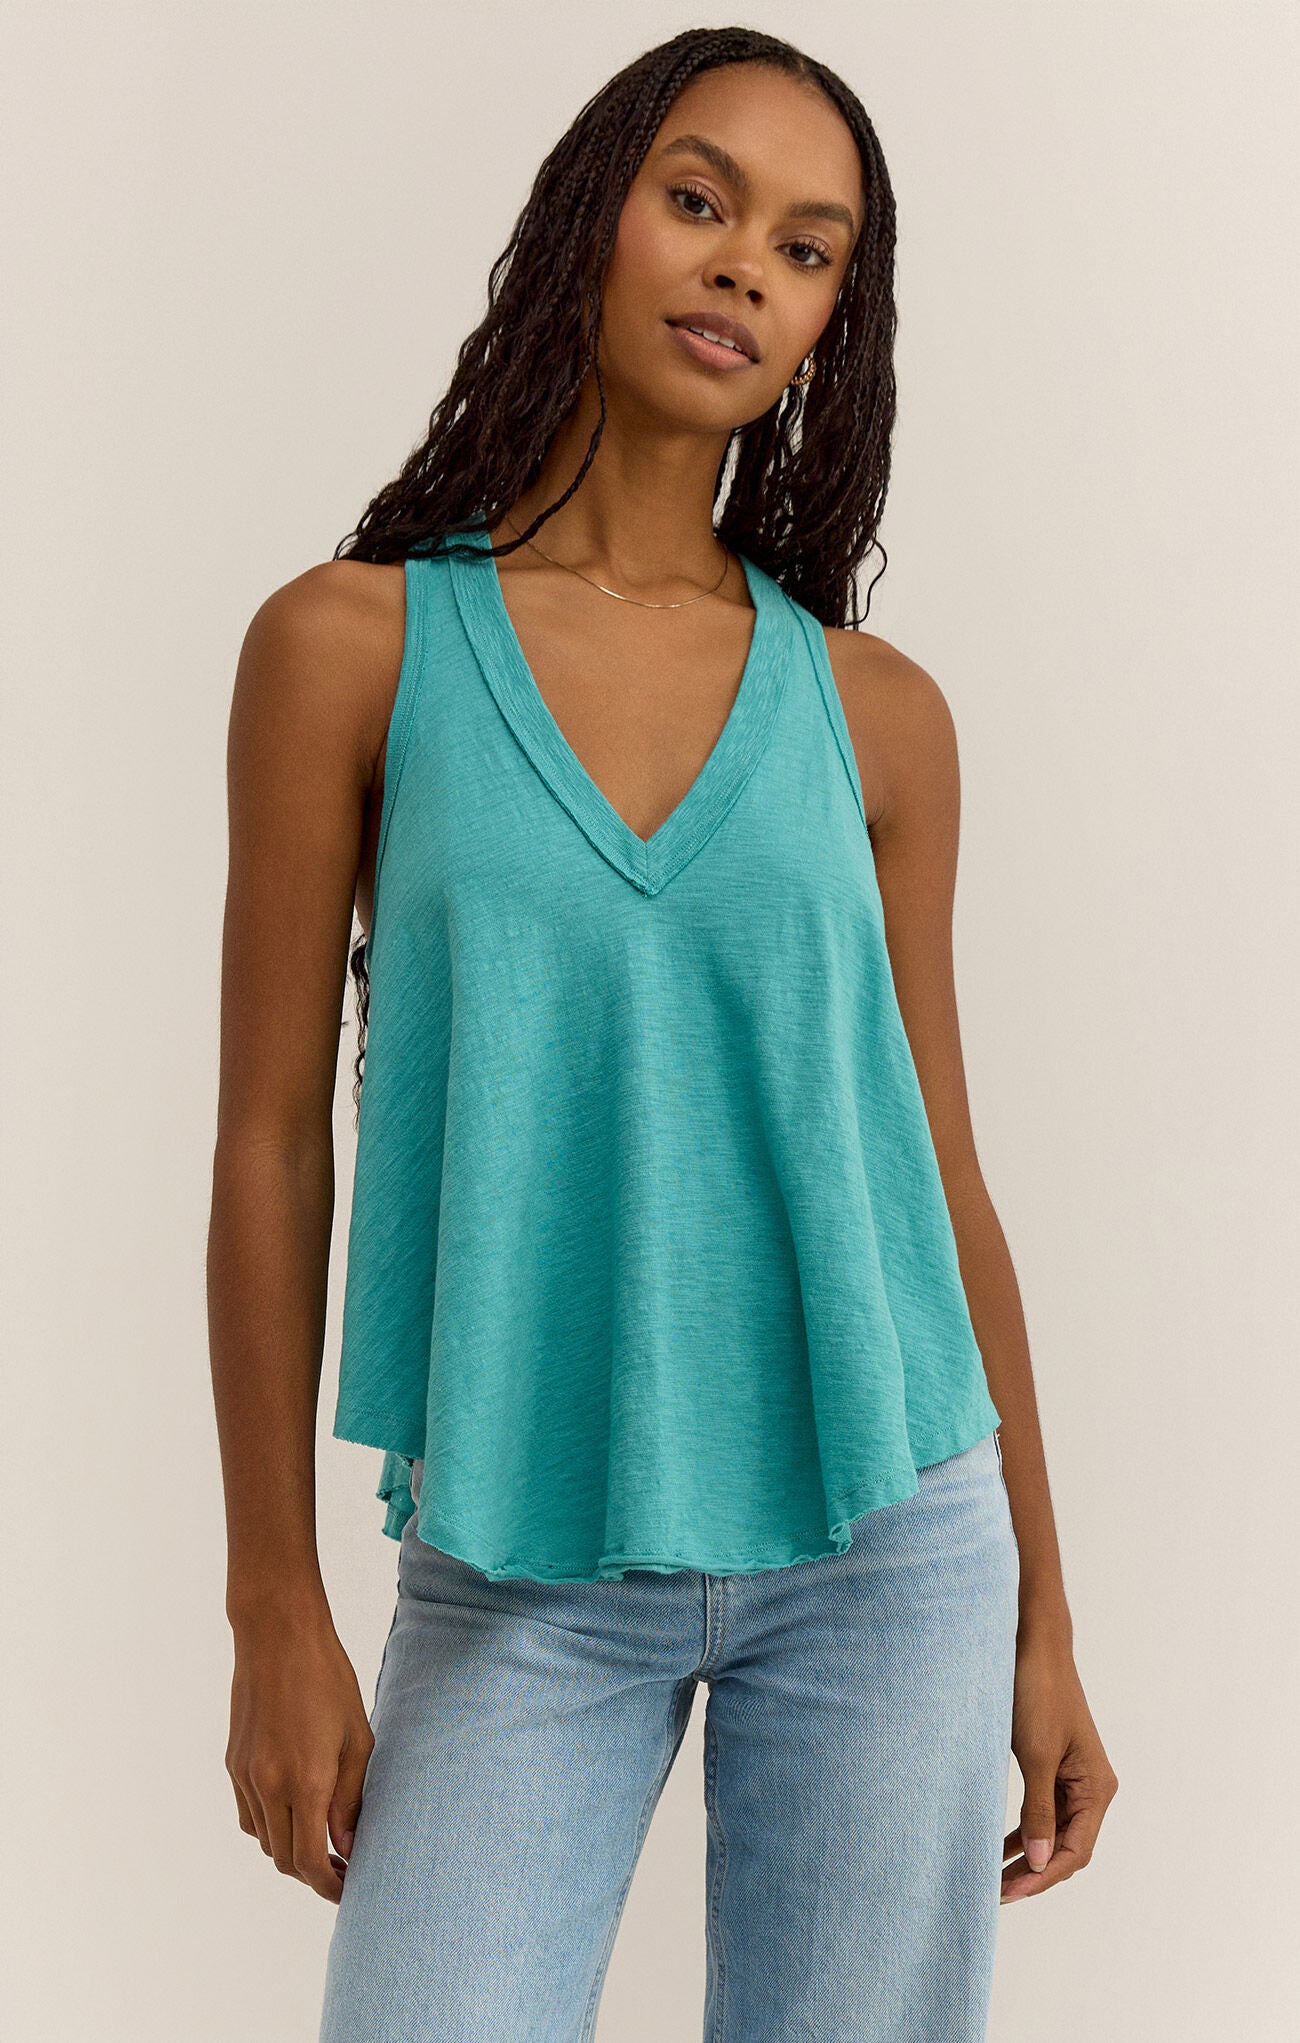 Z SUPPLY BAYVIEW TANK IN CABANA TEAL